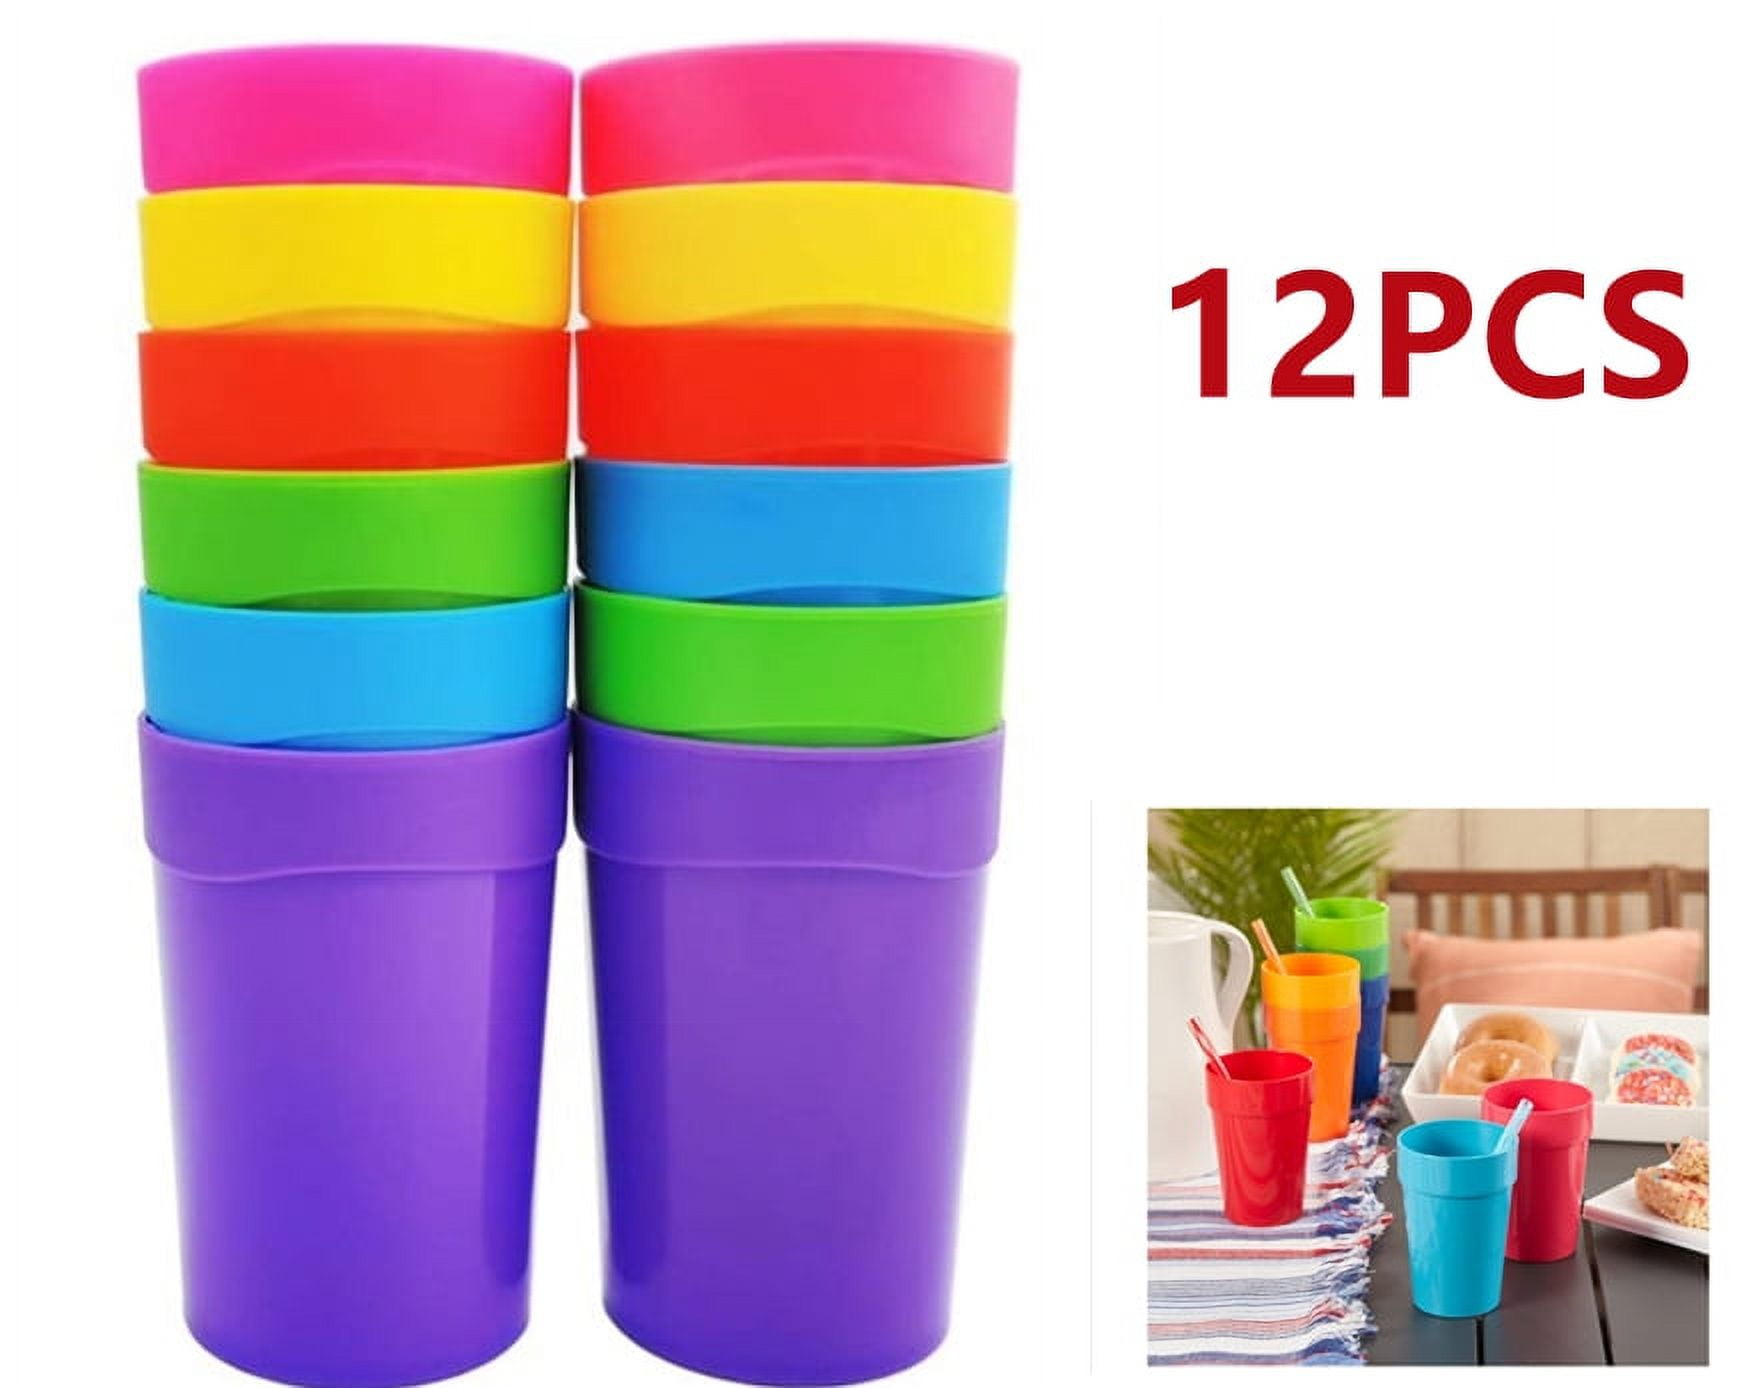 Small Plastic Drinking Cups for Kids, 12 Pcs, Toddler Cups, Kid Glass, Drinking  Glasses,Outdoor Cups,Reusable, Unbreakable, Colorful